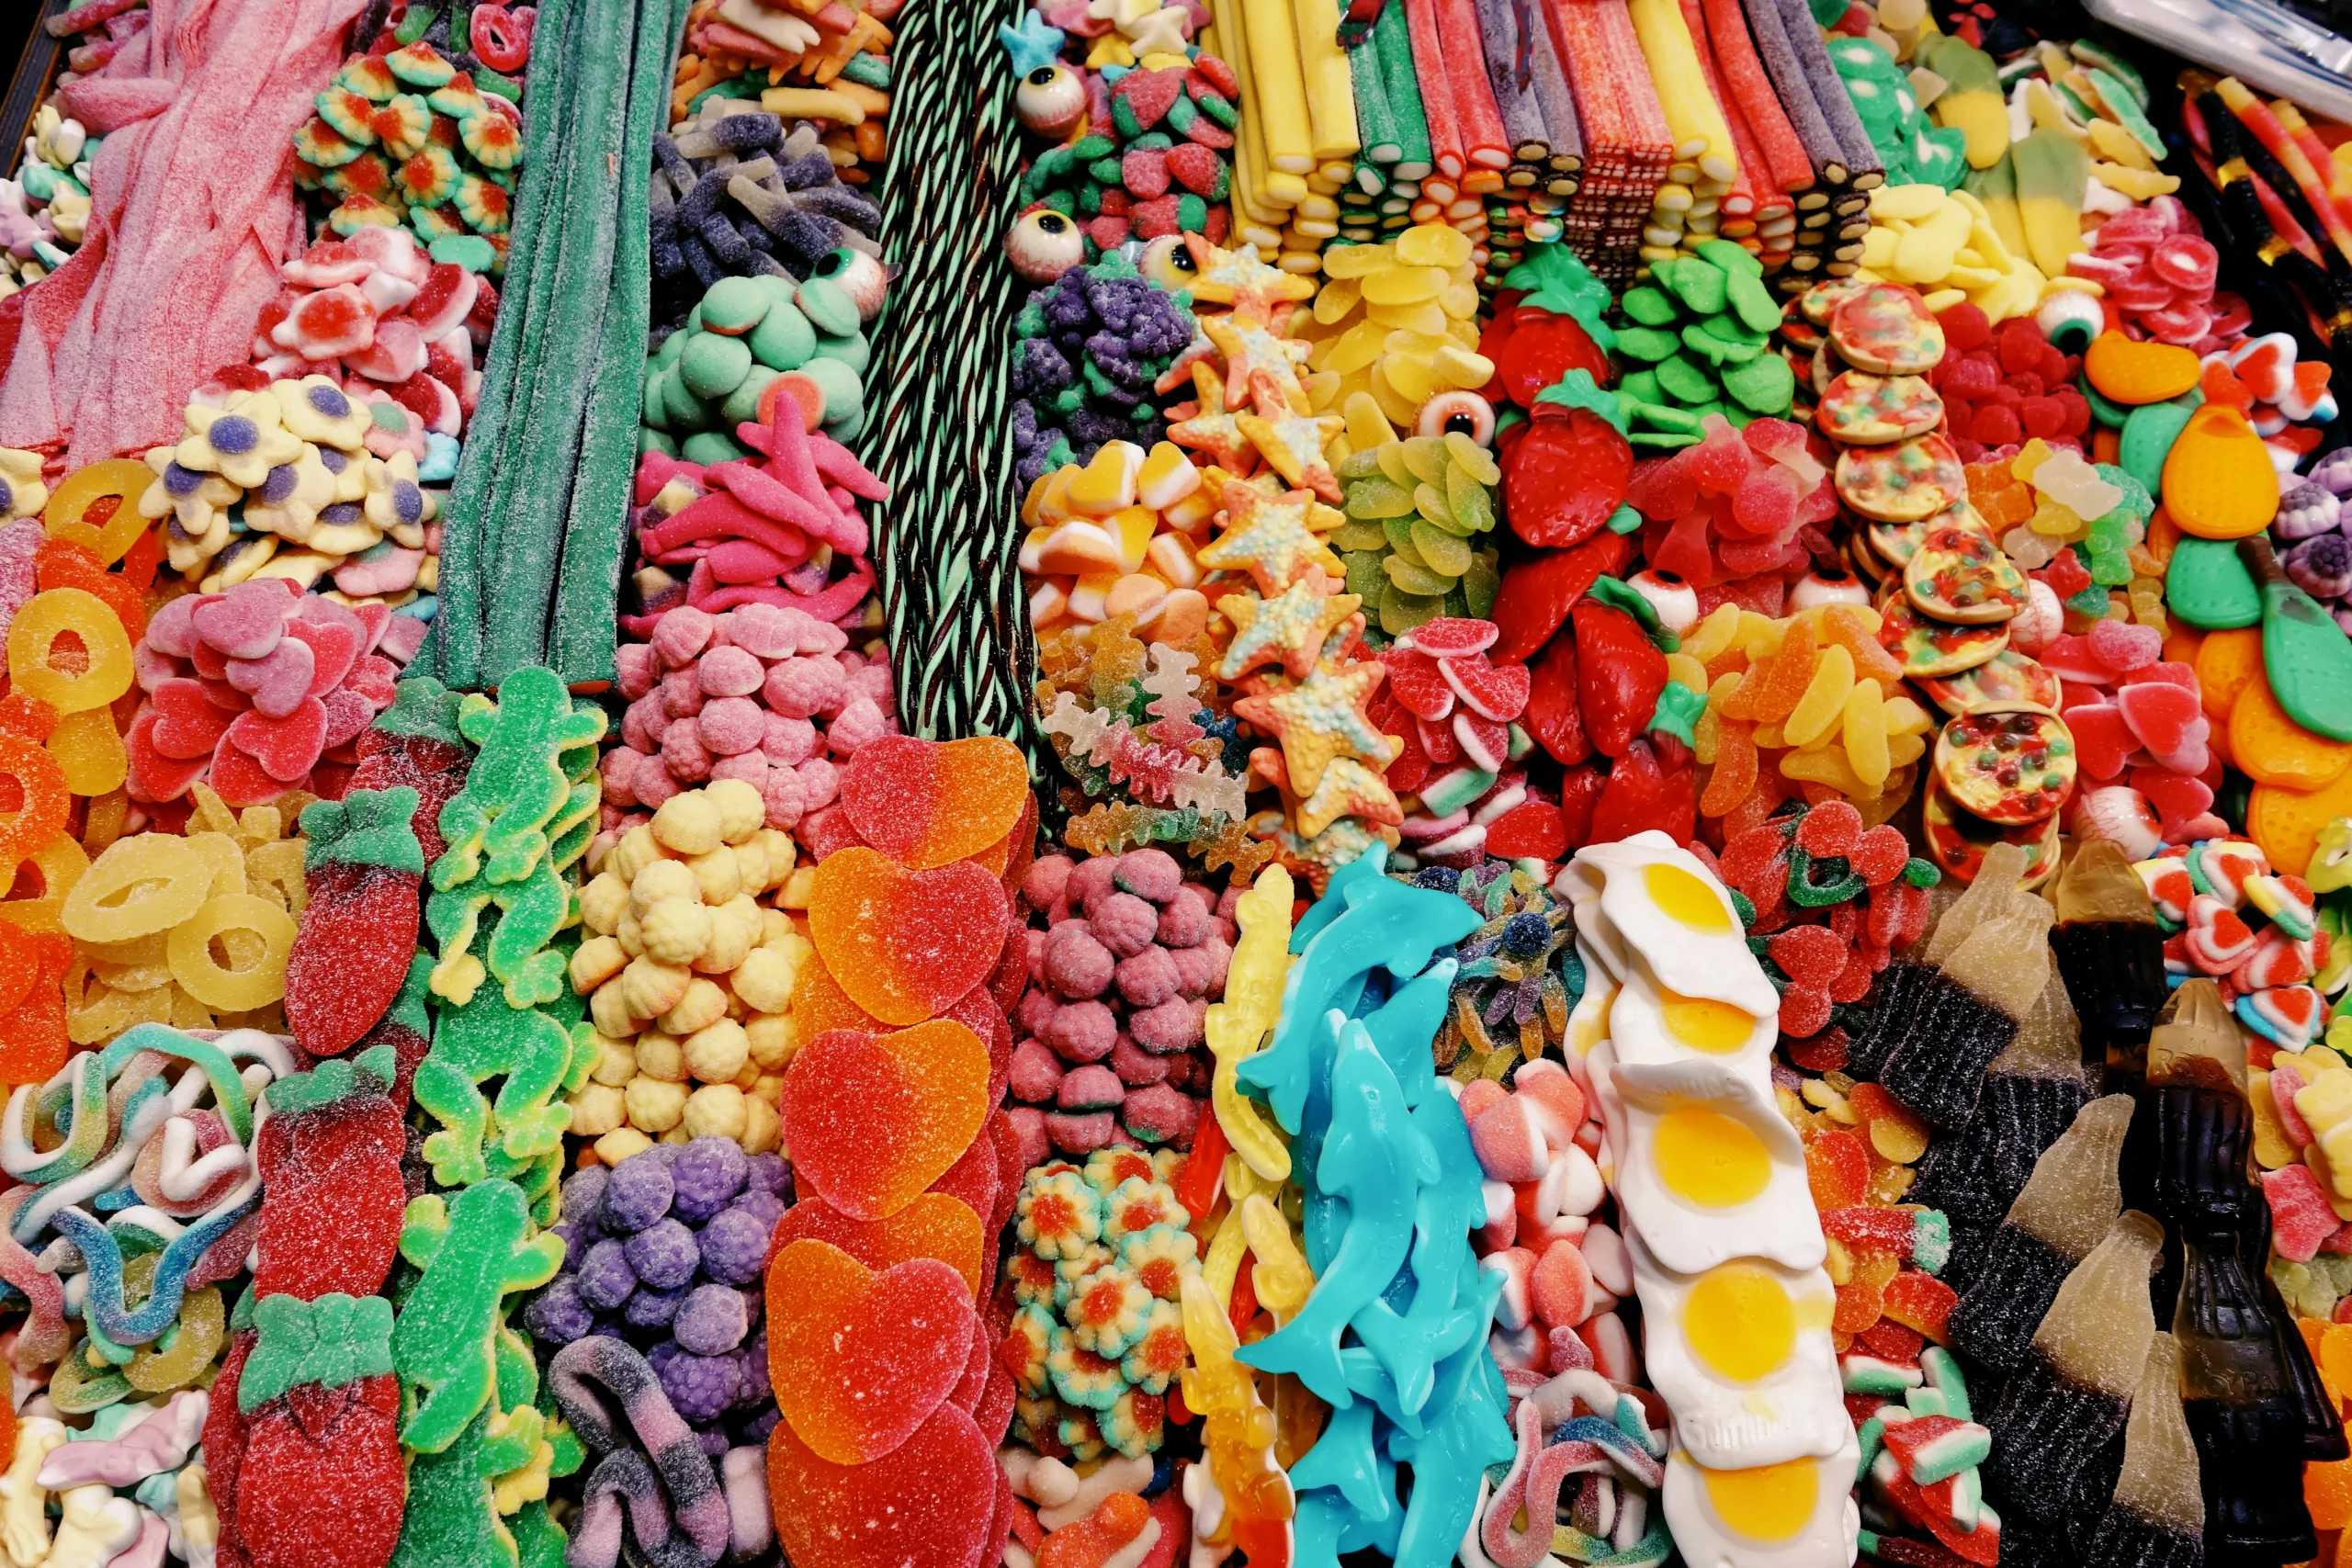 Rows of fresh gummy American candy in a candy store.